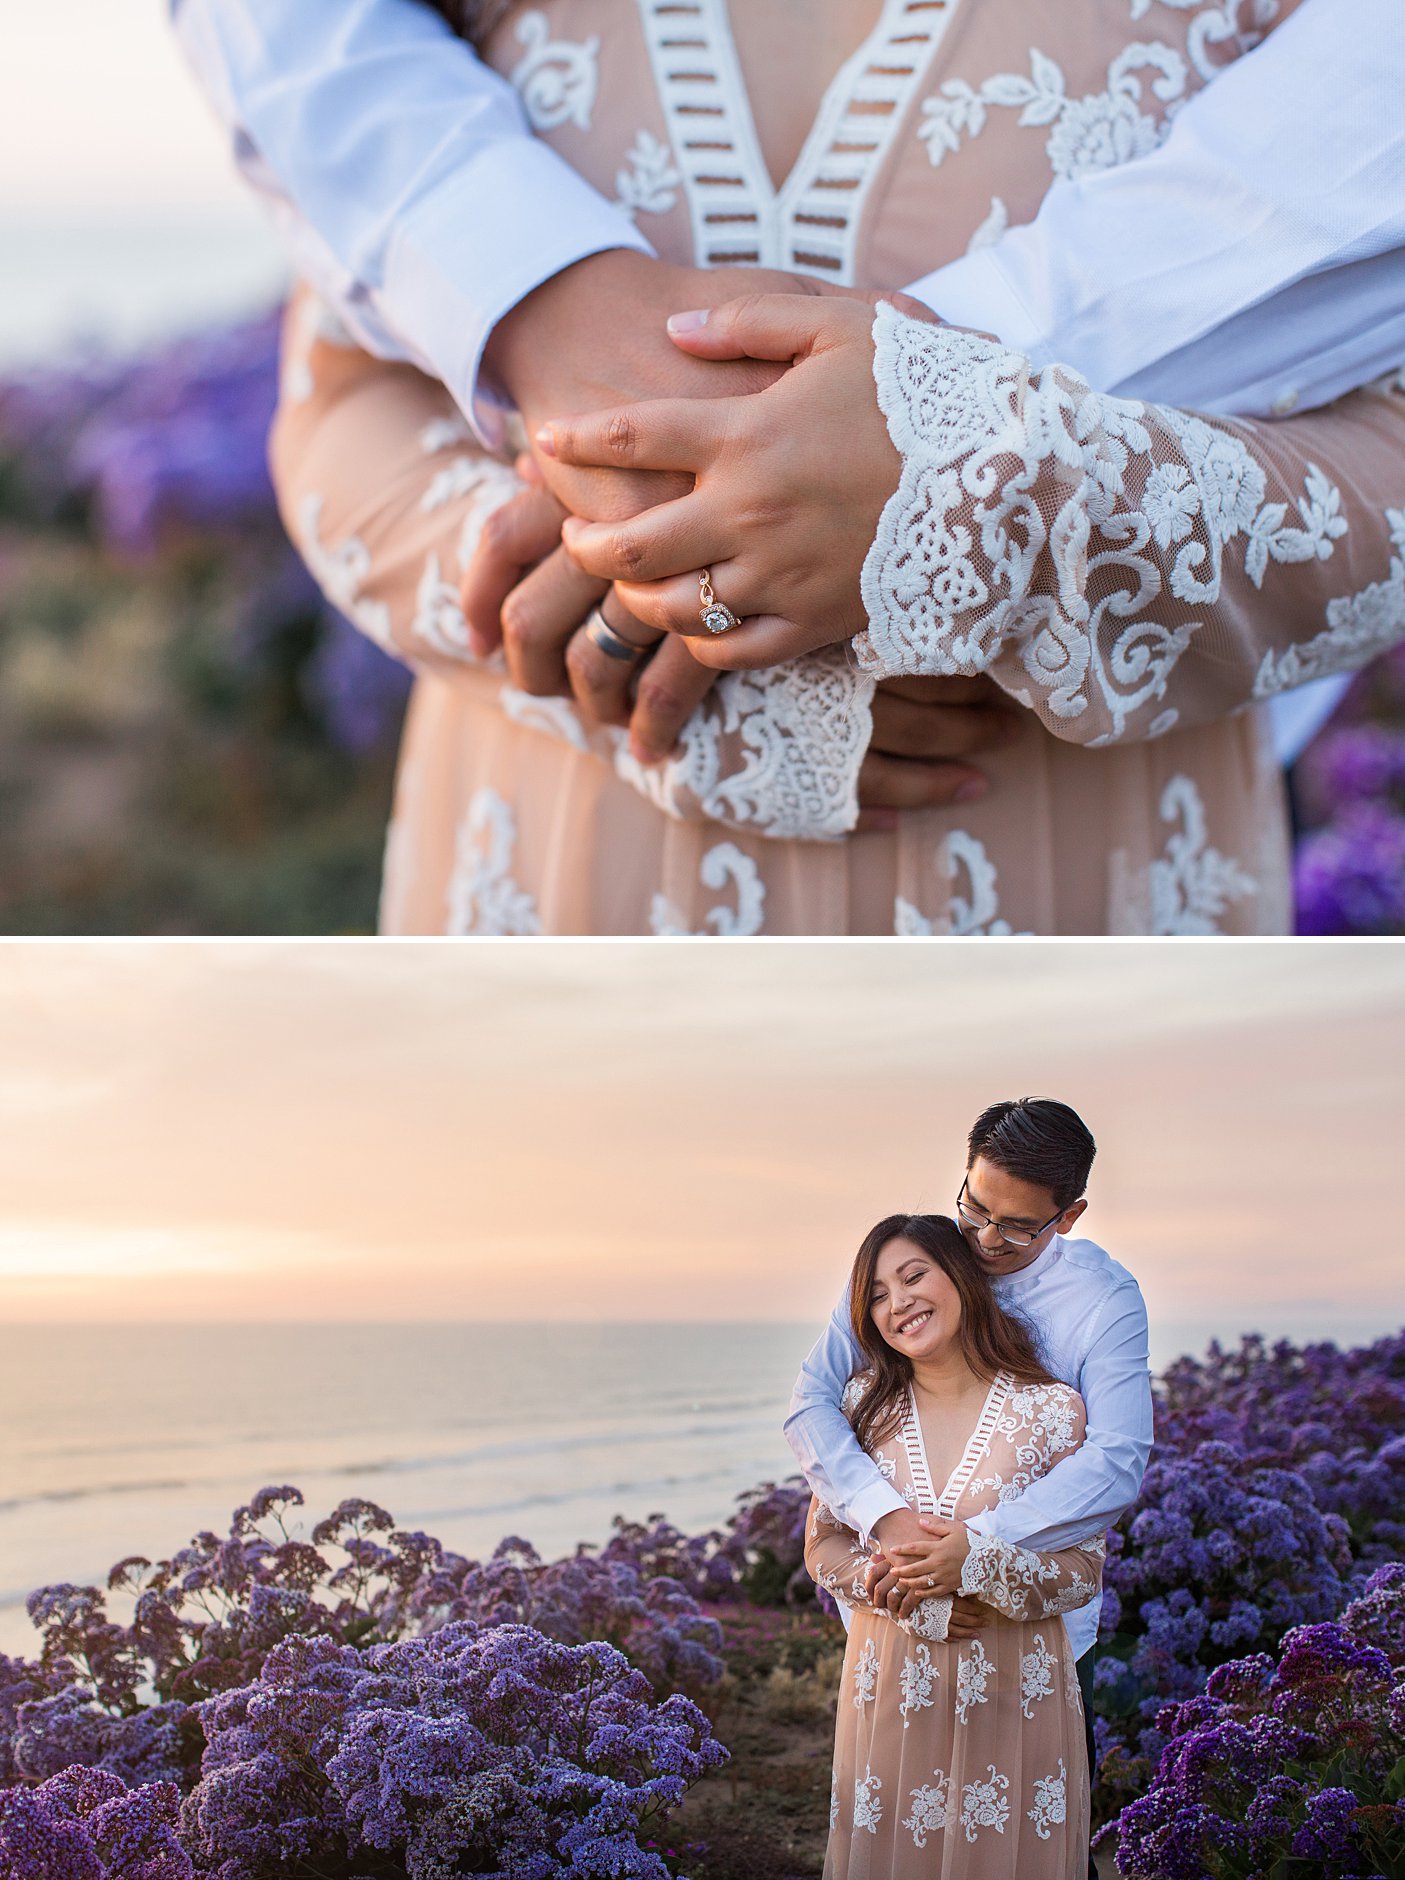 Sunset engagement session at the cliff. Purple flowers everywhere. Beautiful engagement ring.